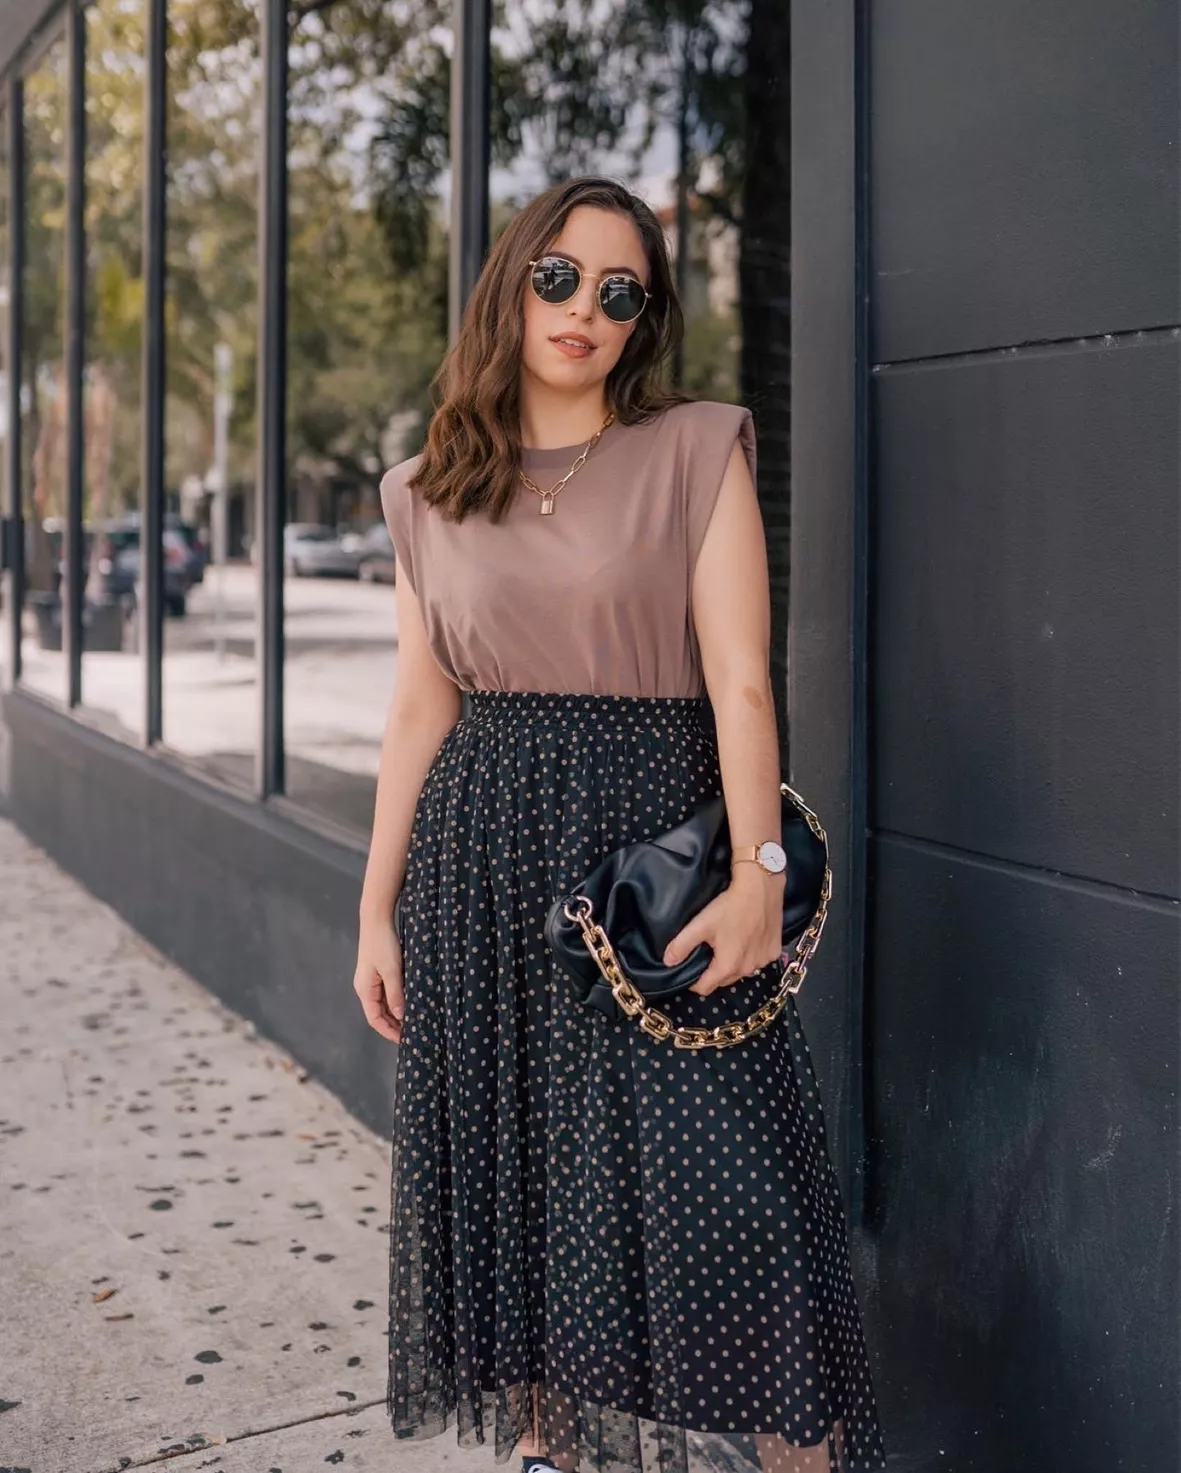 Padded shoulder dresses to try this autumn according to influencers